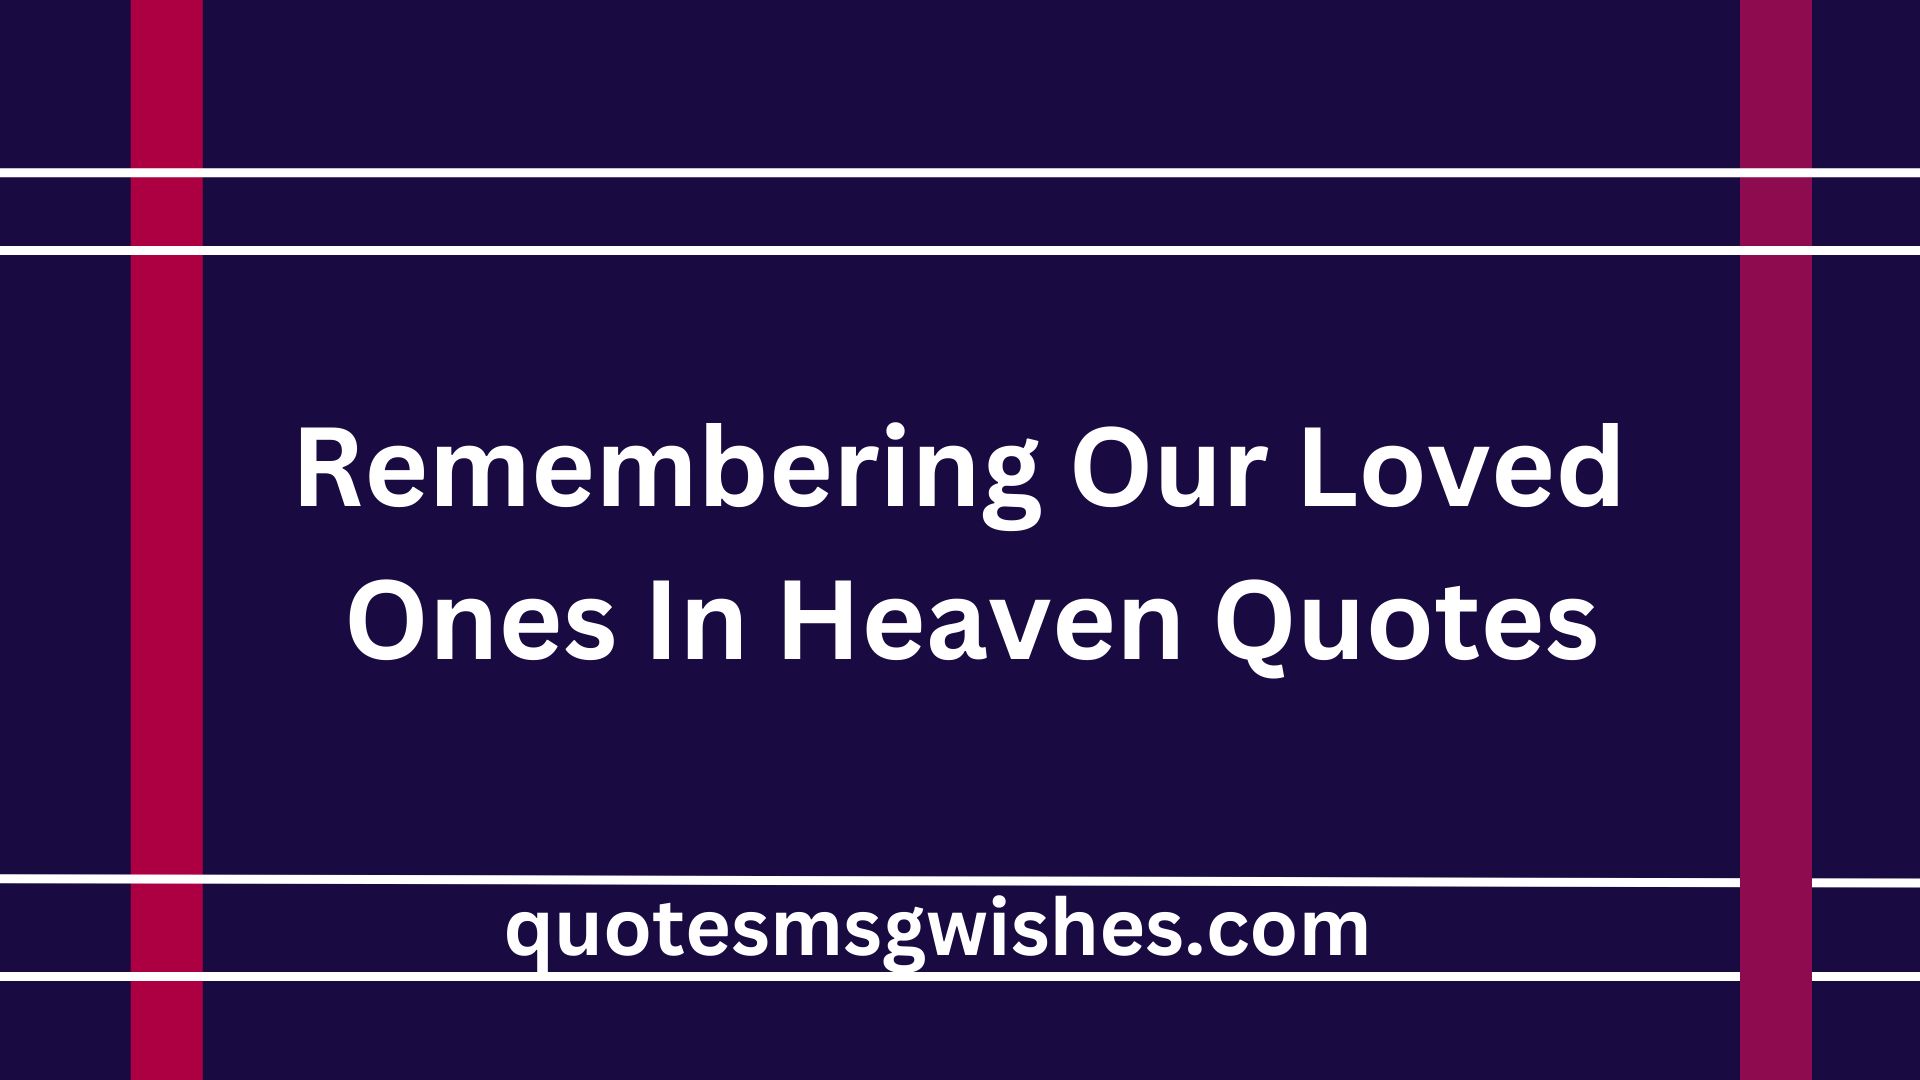 Remembering Our Loved Ones In Heaven Quotes